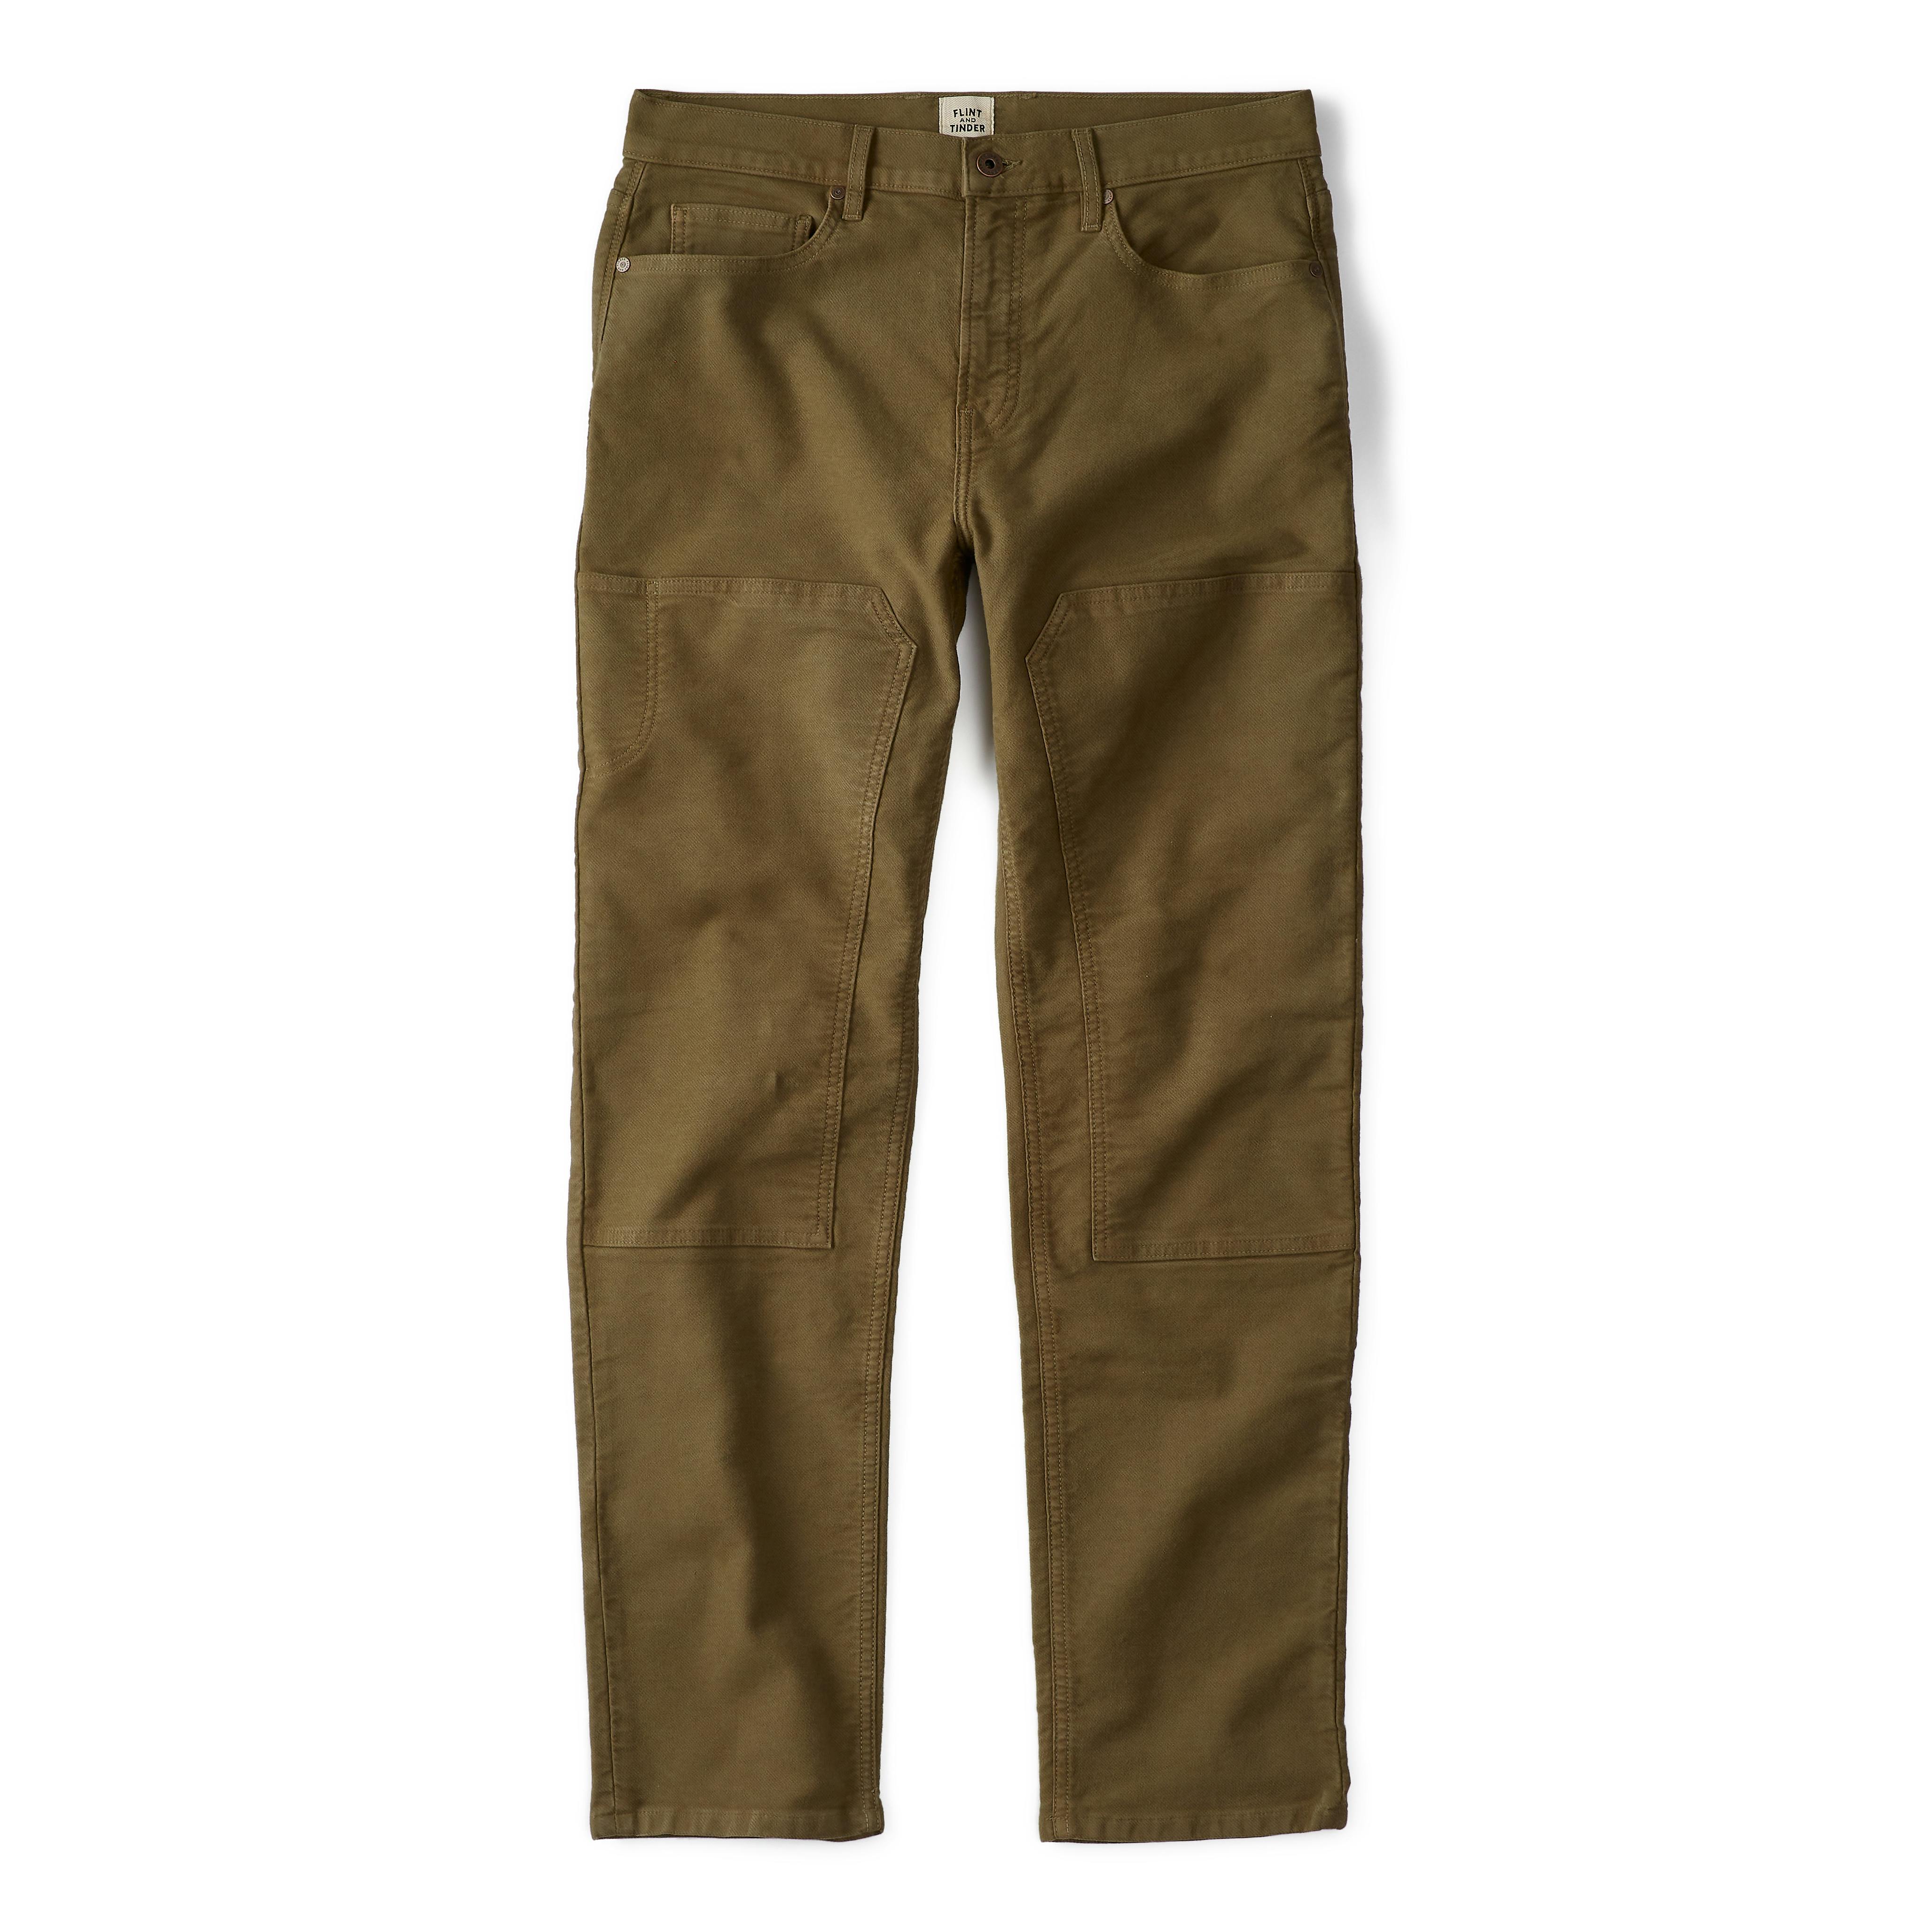 The American-Made Heritage Mill Pant